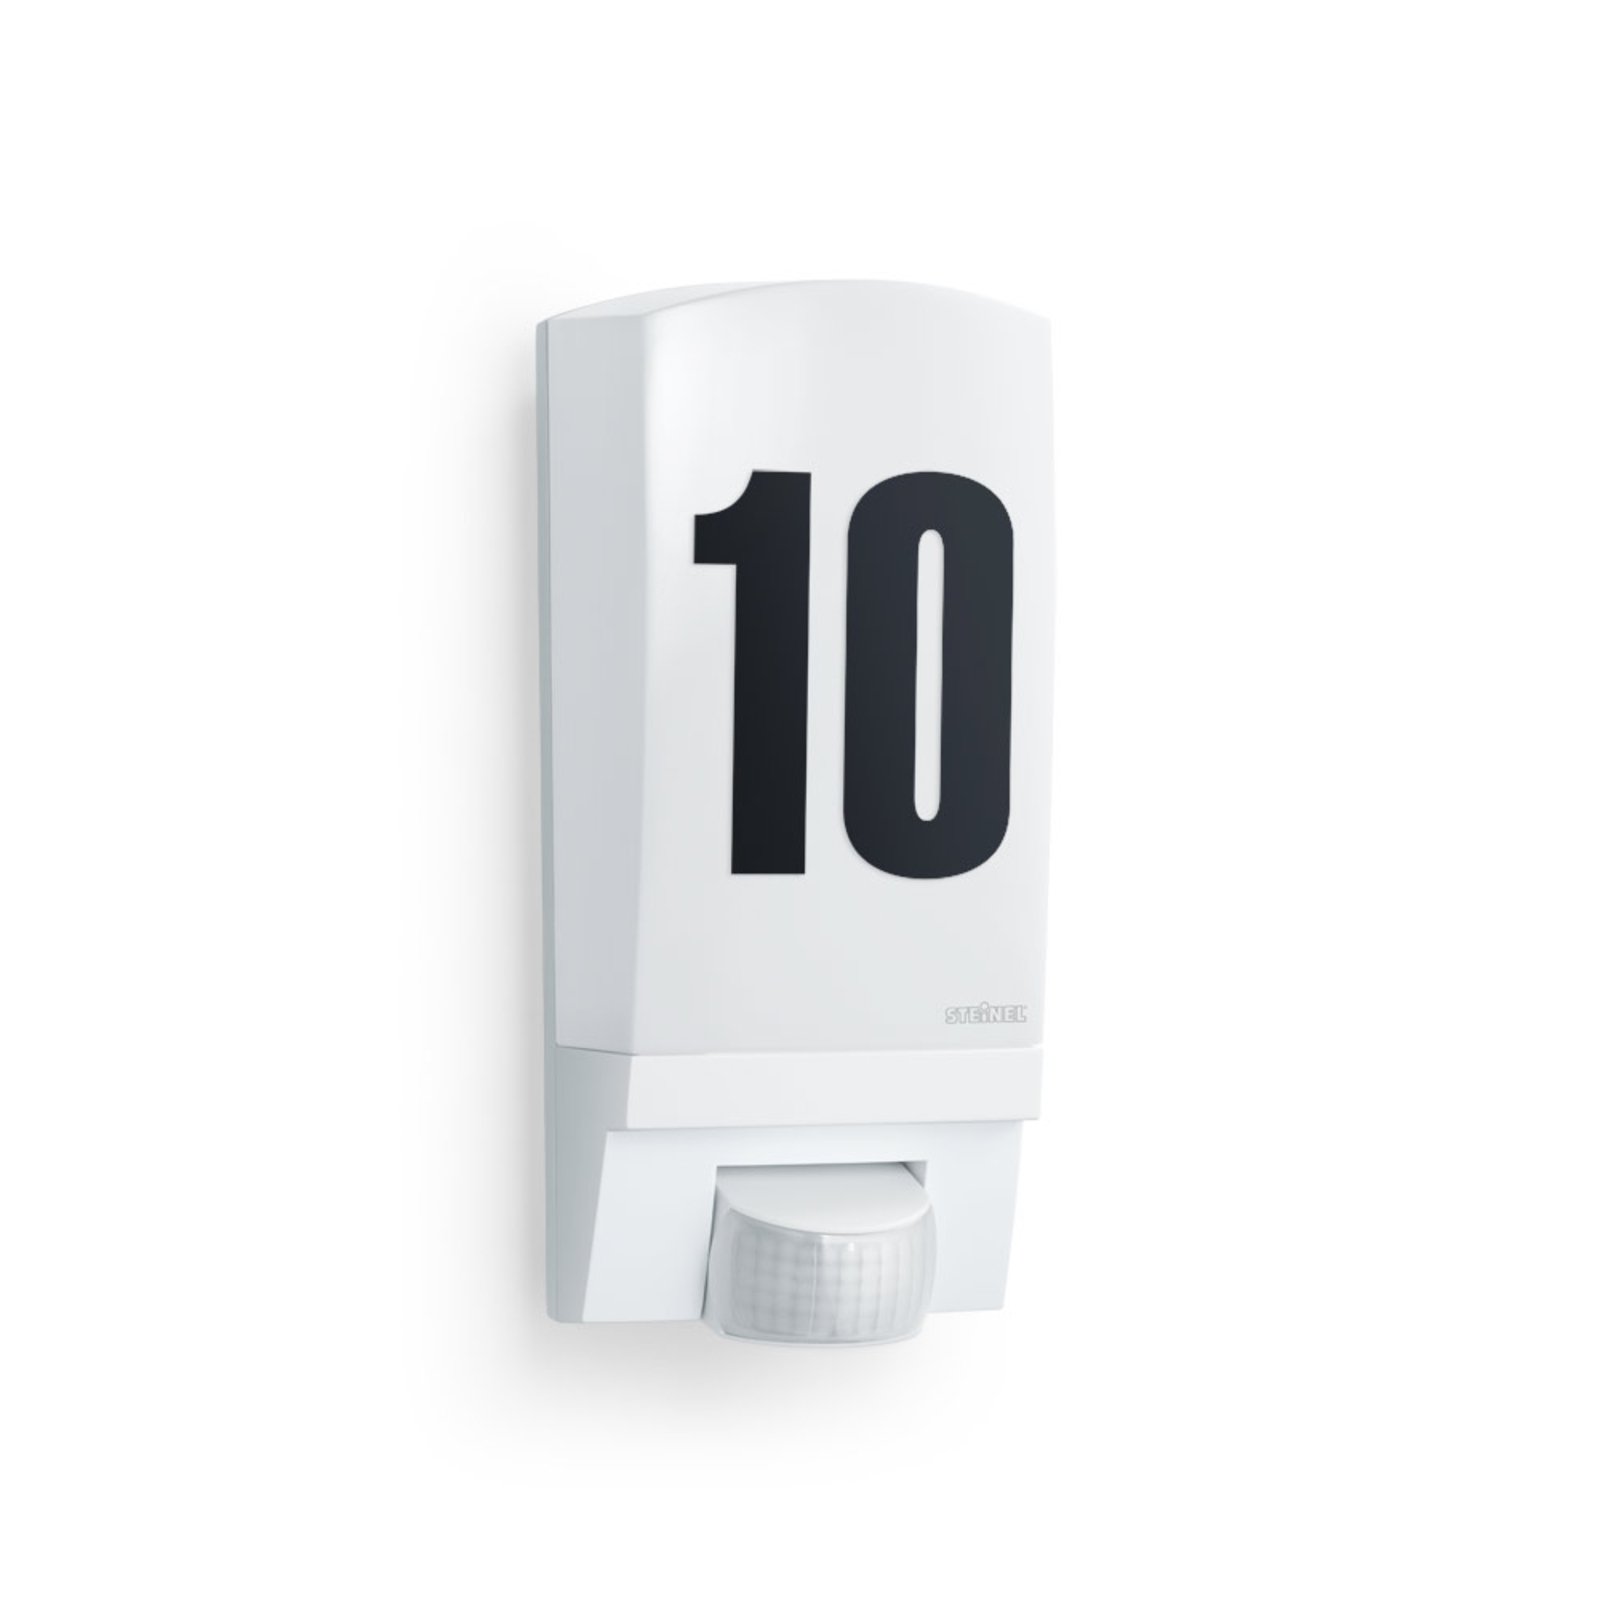 STEINEL L 1 house number light with a sensor white